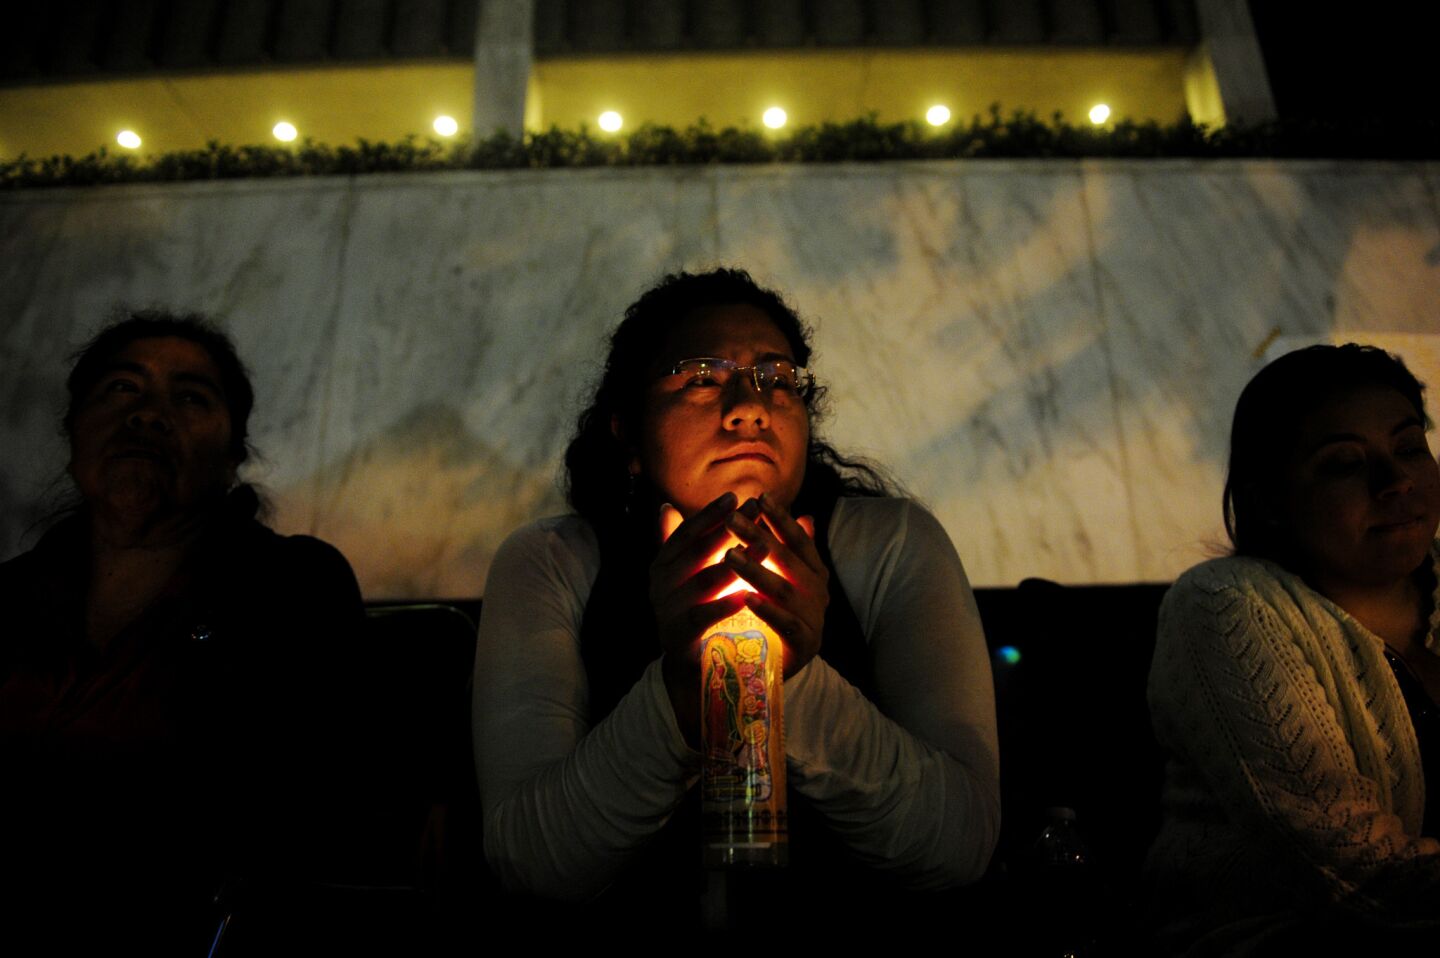 Mercedes Montano, an immigrant from Mexico living in U.S. without legal status, prays during a 24-hour vigil outside the Civil Center in downtown Los Angeles. Demonstrators called on Congress to pass immigration reform.